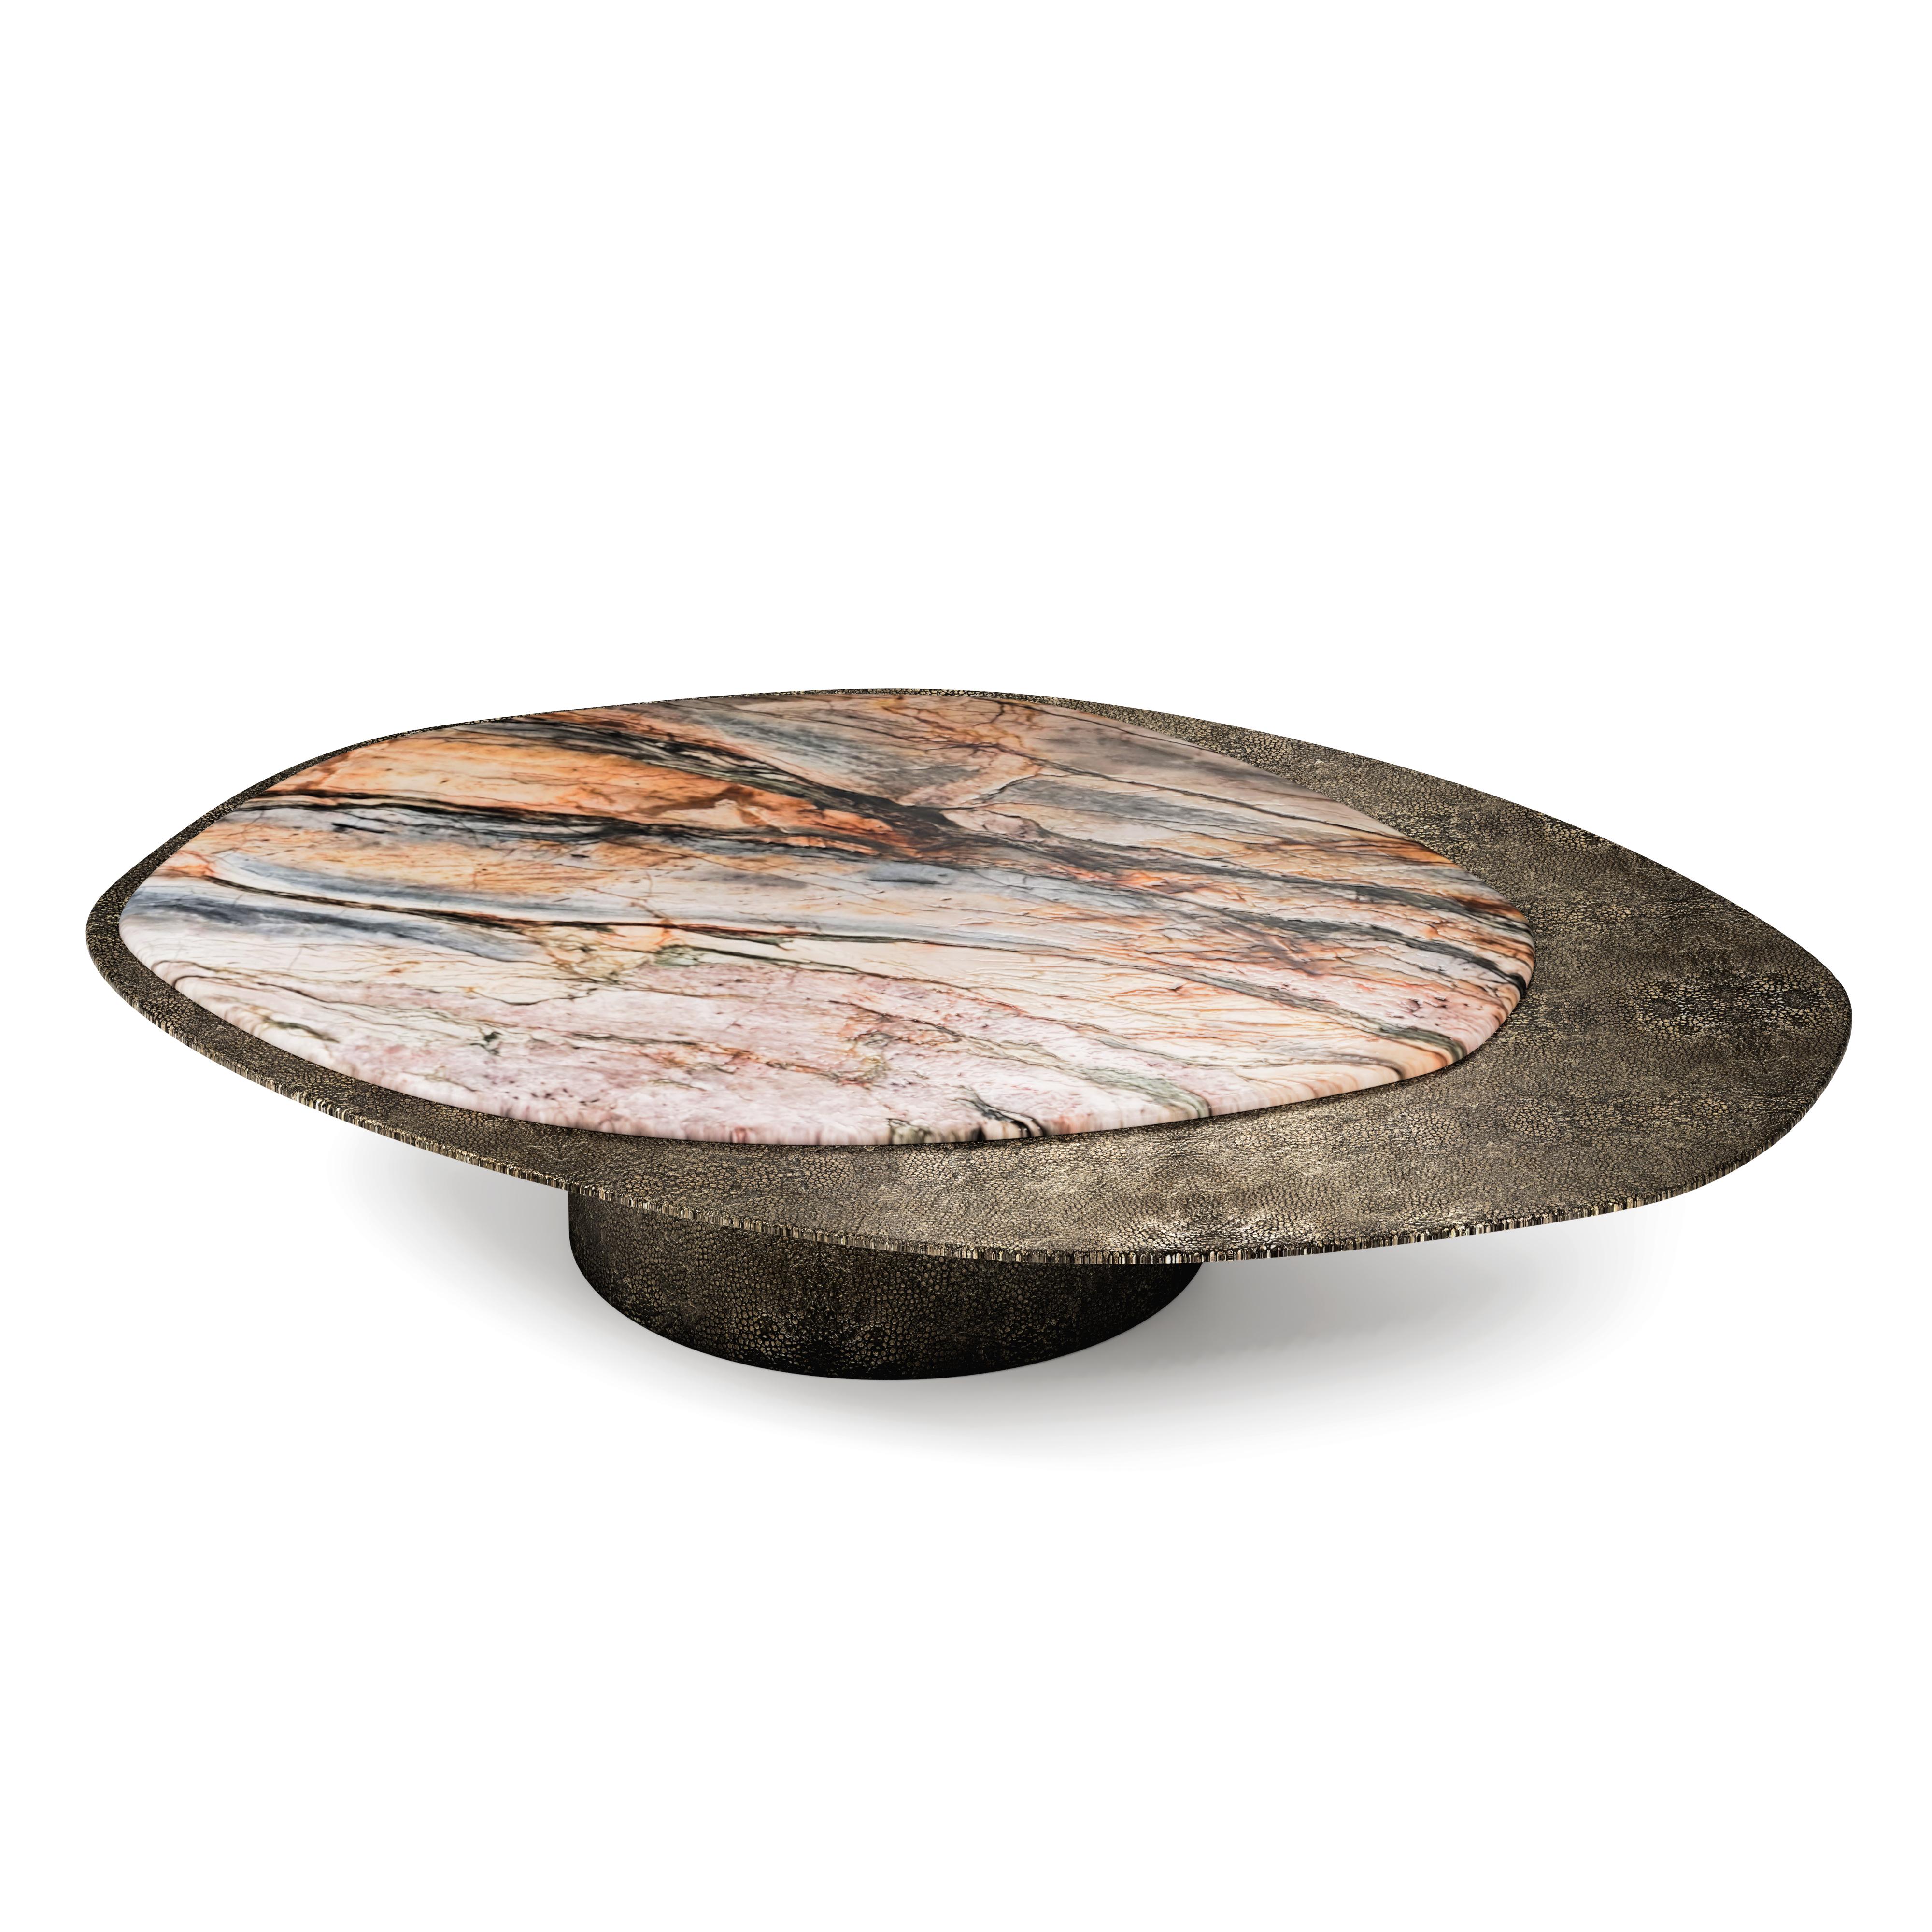 “The Epicure XI” contemporary center coffee table ft Michelangelo quartzite and aluminium elements in Antique Bronze regged ray skin

Luxury doesn’t always follow the common patterns. Luxury goes beyond and almost like one of the best gourmets